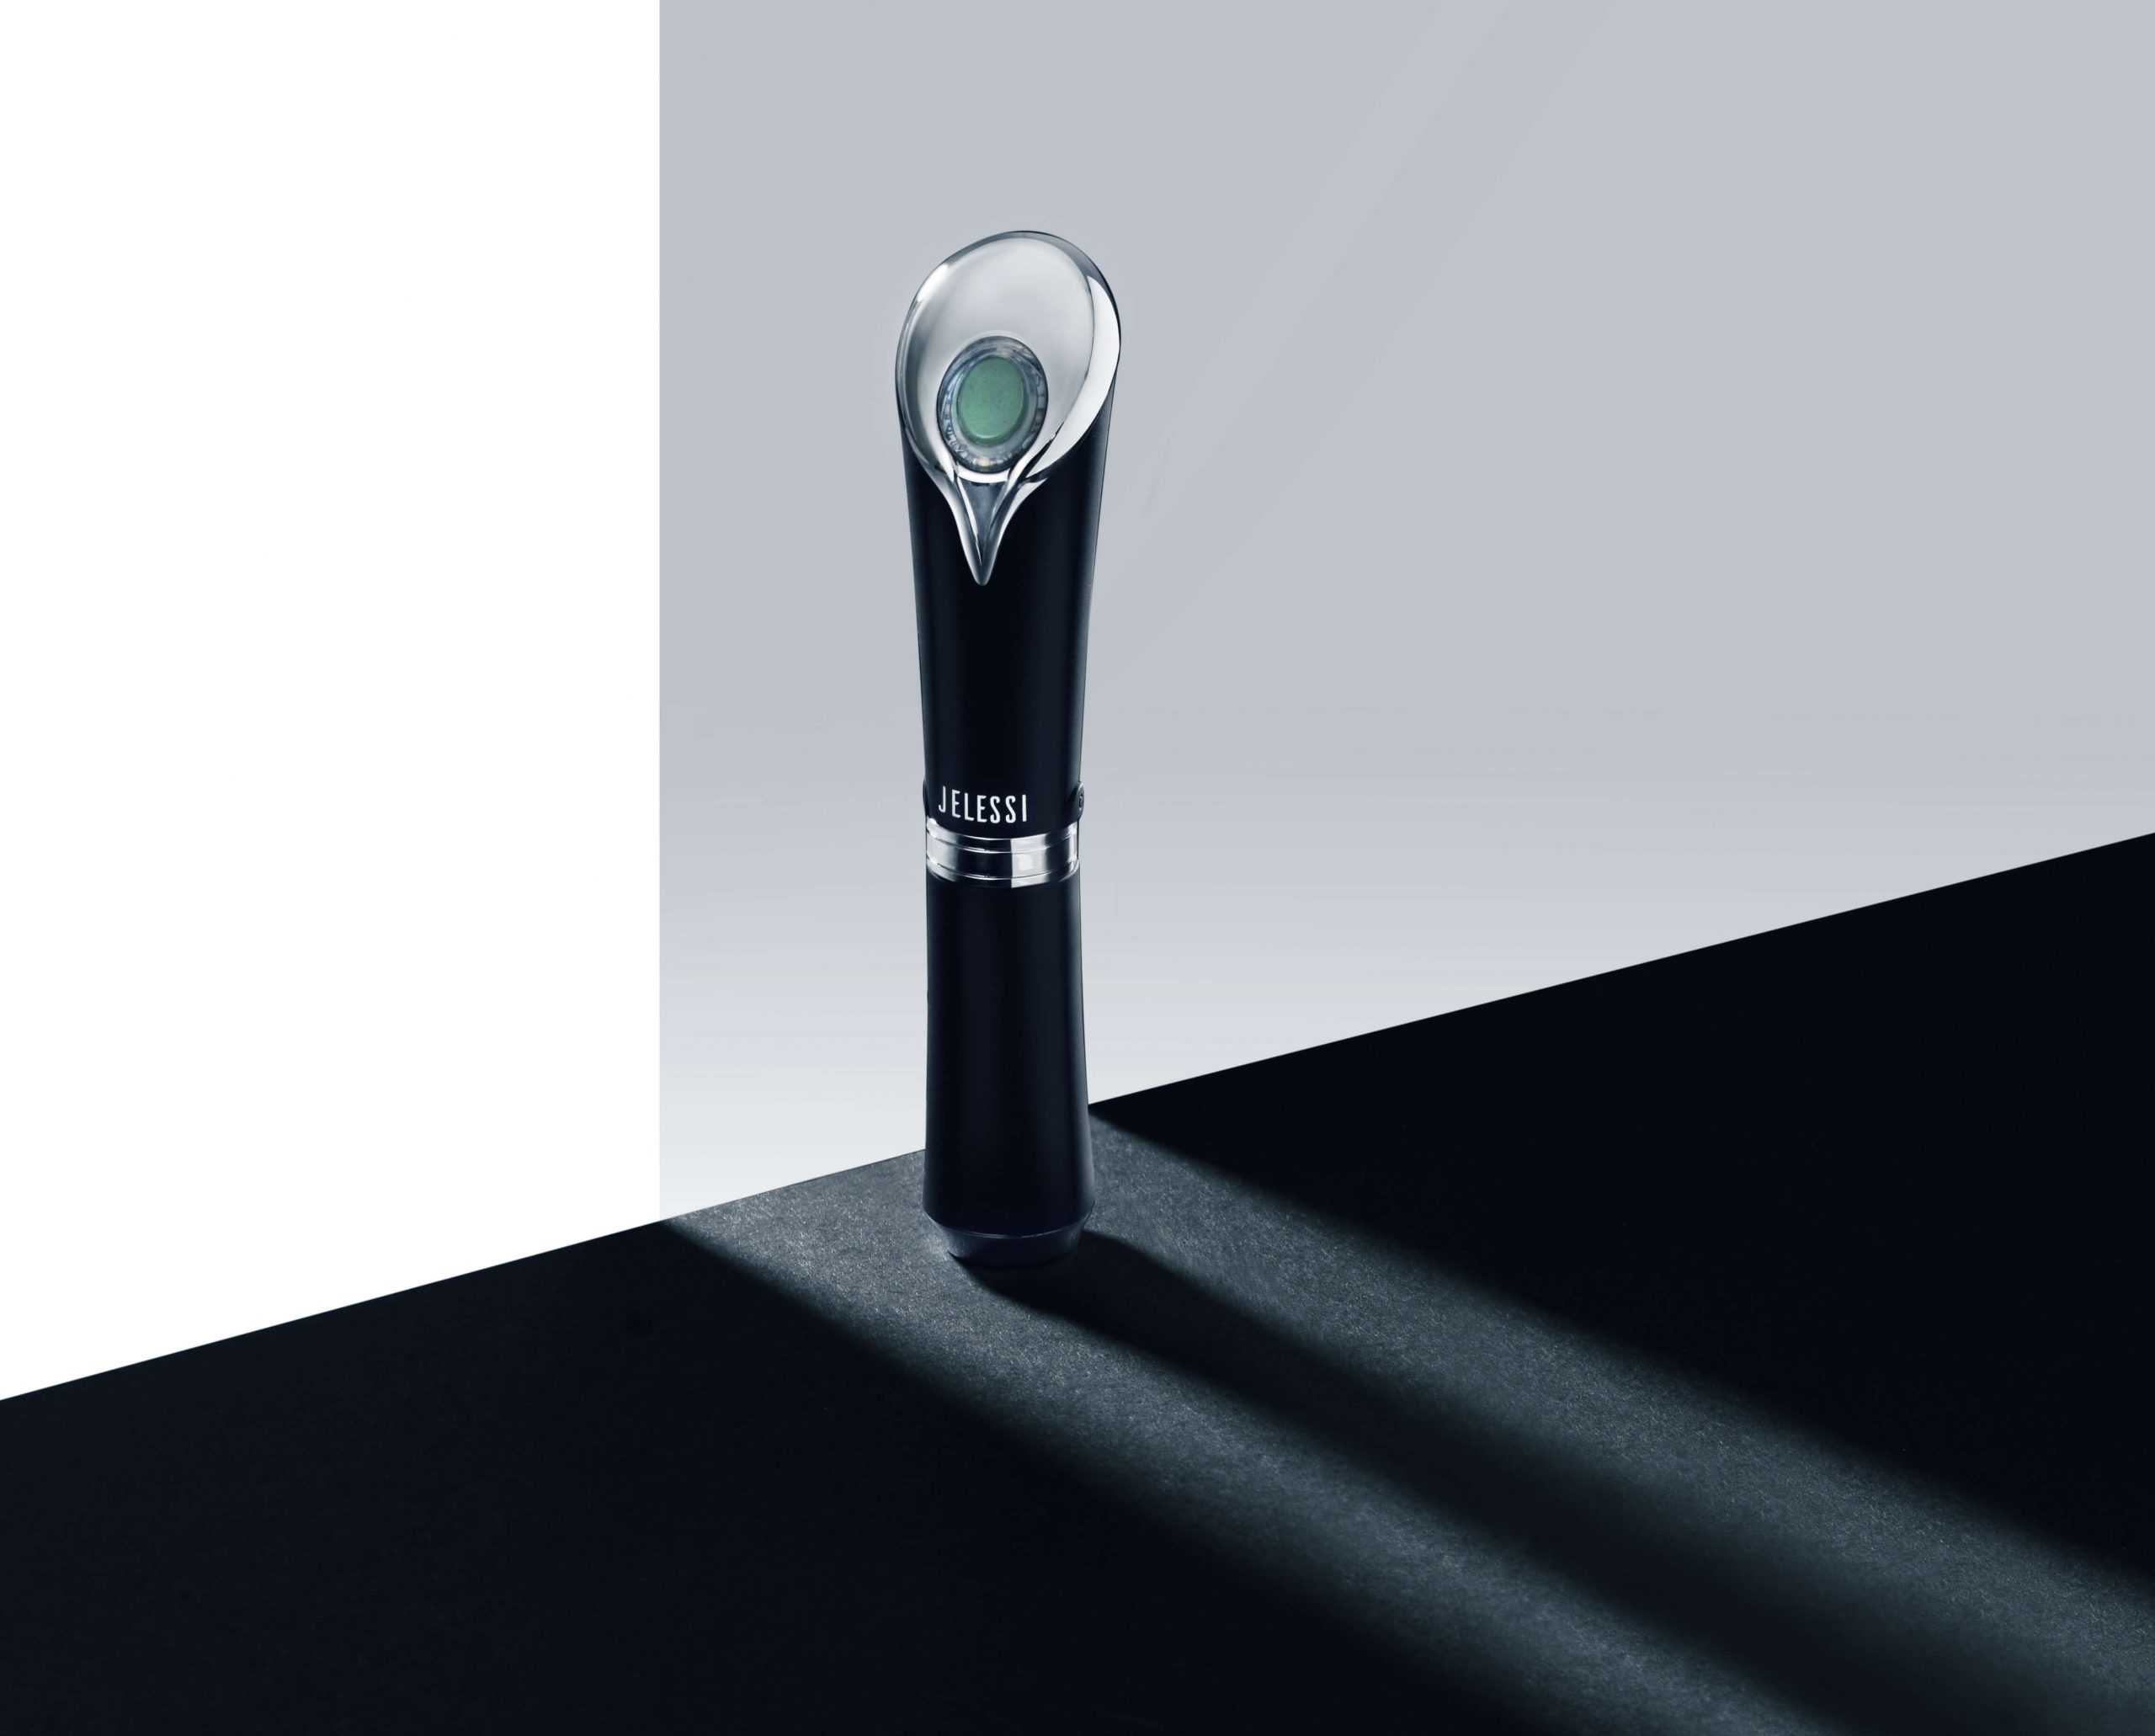 Jelessi Eye Wand -  LED light therapy Devices